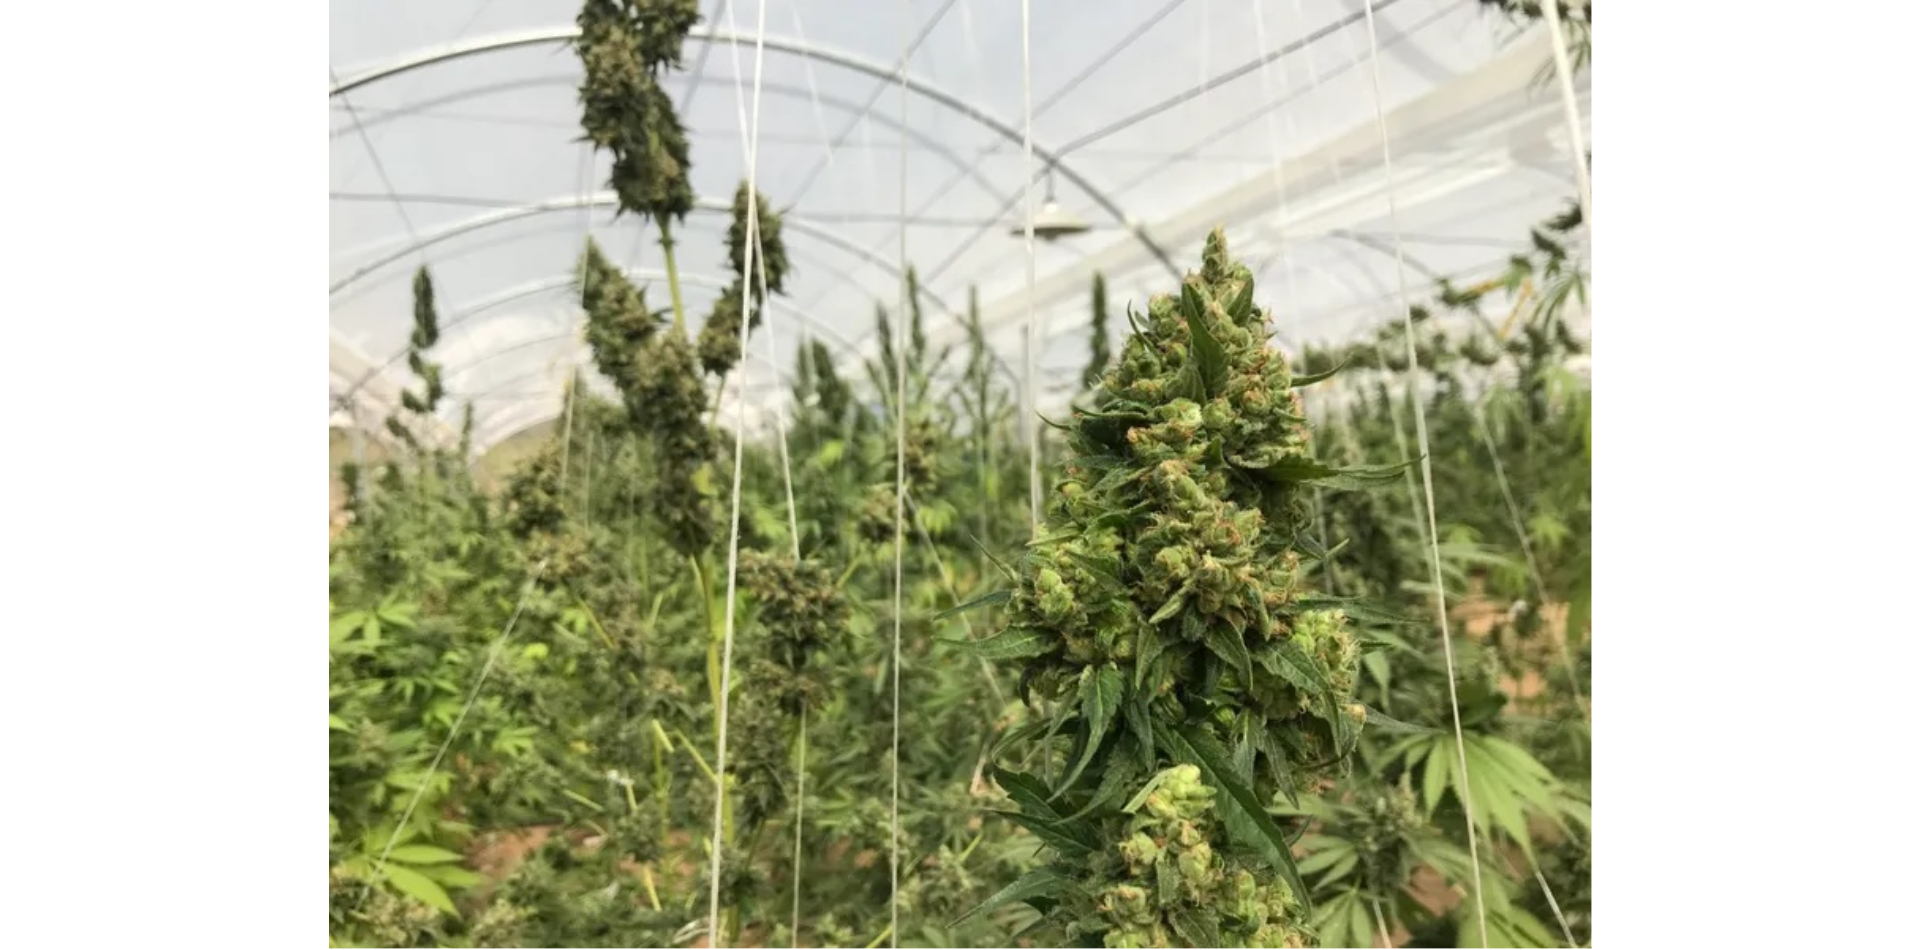 Cannabis Do-Gooders: These Companies Are Lending A Helping Hand Against COVID-19